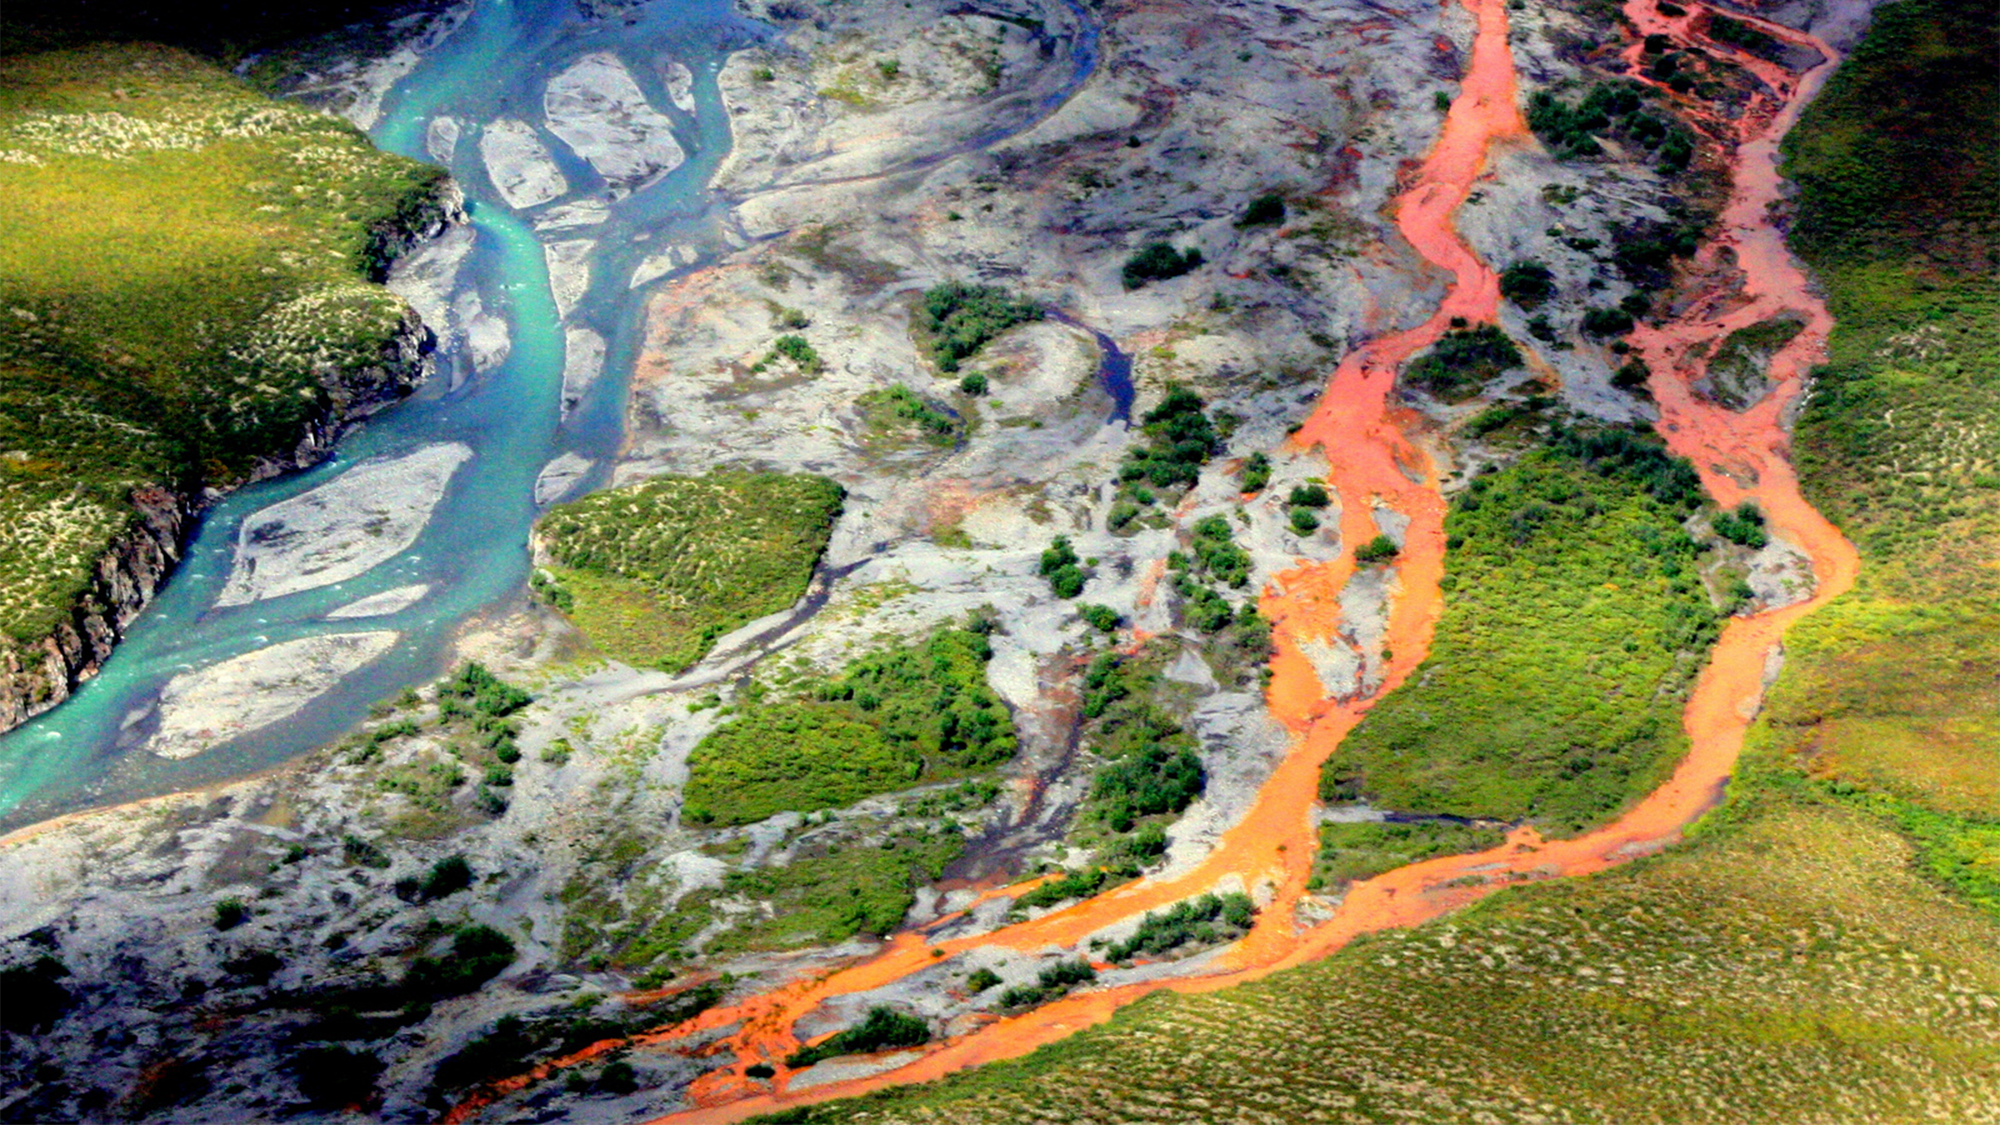 An aerial view of the rust-colored Kutuk River in Gates of the Arctic National Park in Alaska. Thawing permafrost is exposing minerals to weathering, increasing the acidity of the water, which releases metals like iron, zinc, and copper.